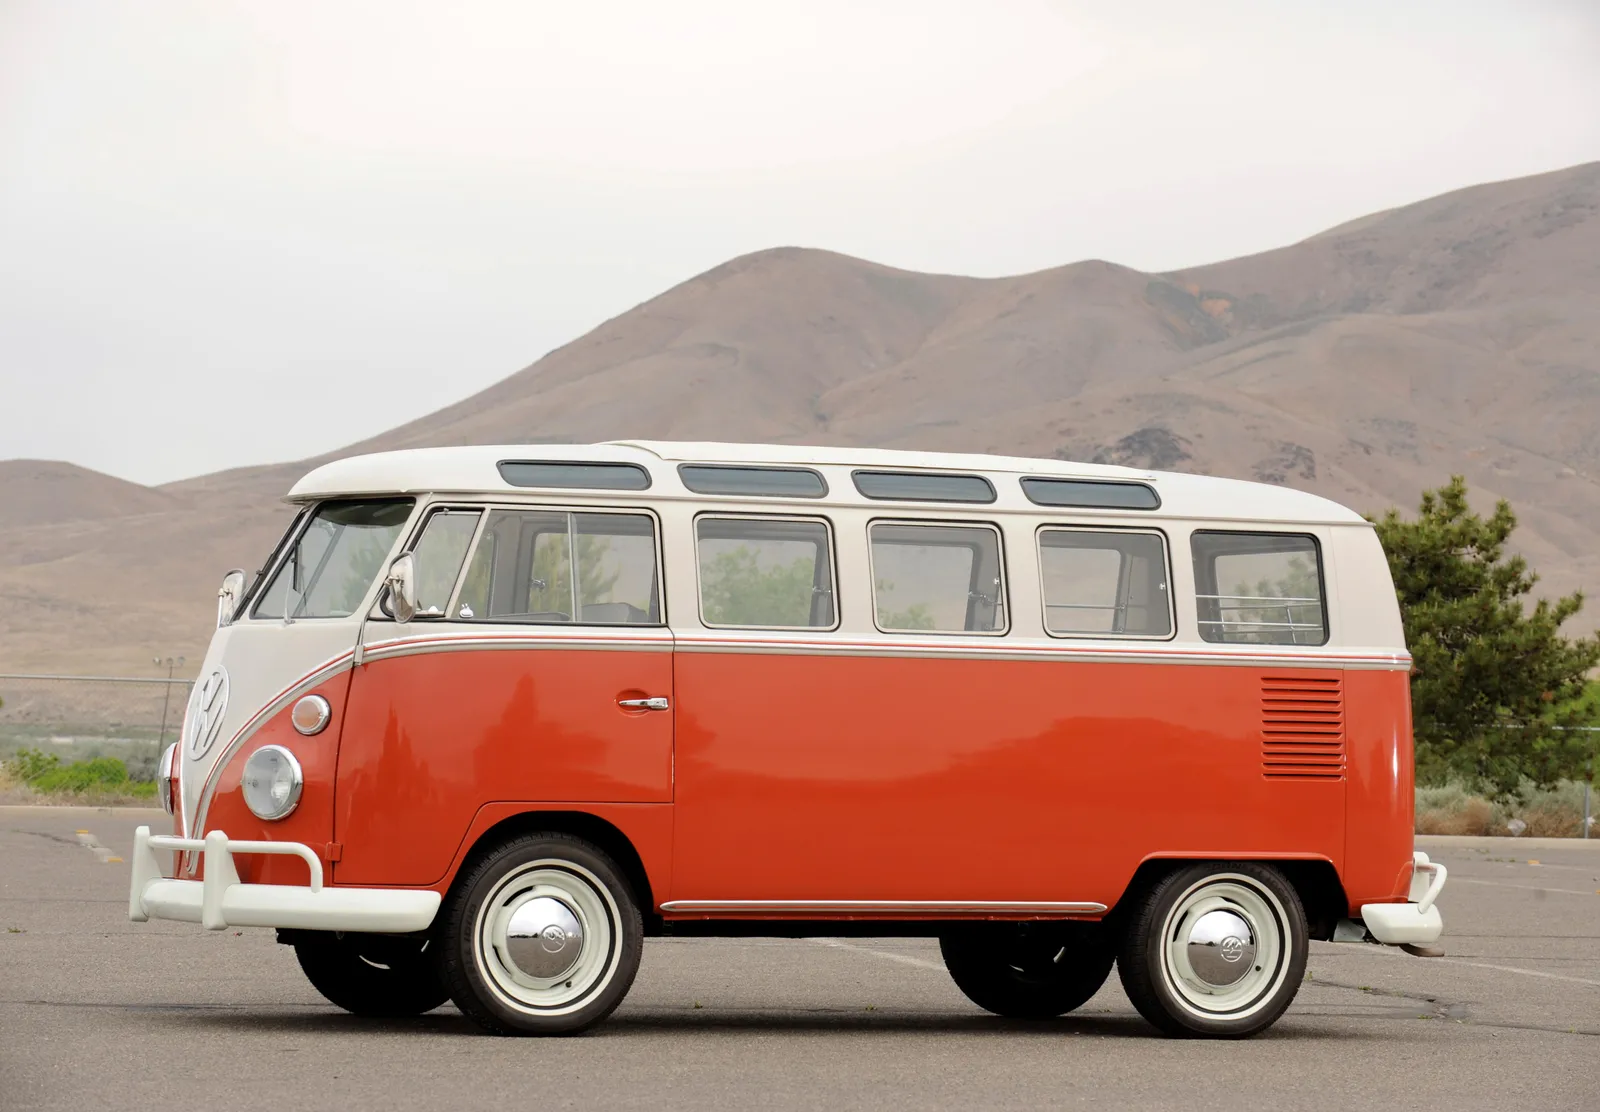 The history of the VW Transporter van